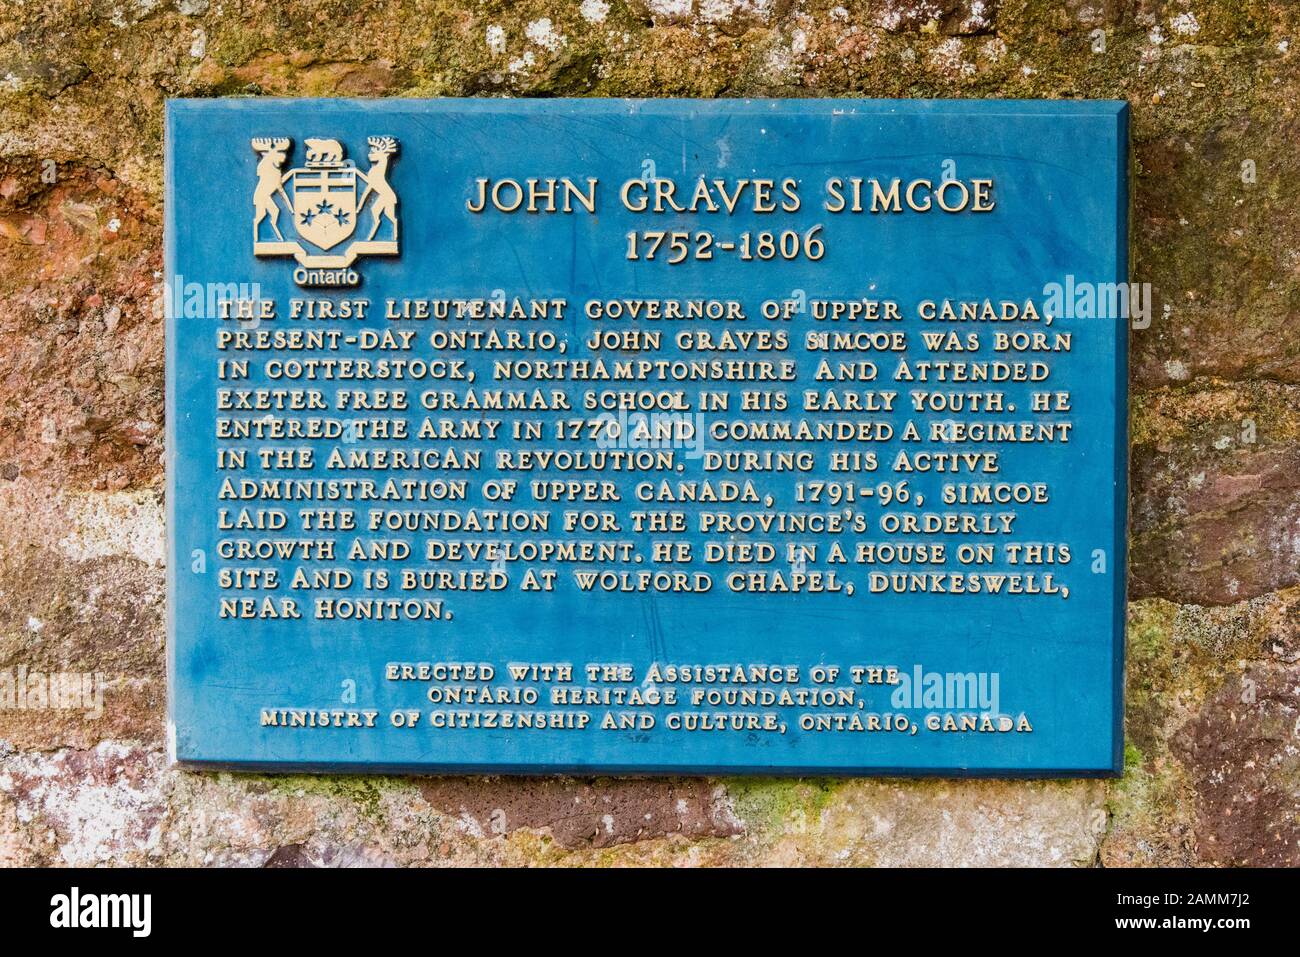 EXETER, DEVON, UK - 31MAR19: Commemorative plaque to John Graves Simcoe, former Lietenant Governor of Upper Canada who died in a house in Cathedral Cl Stock Photo